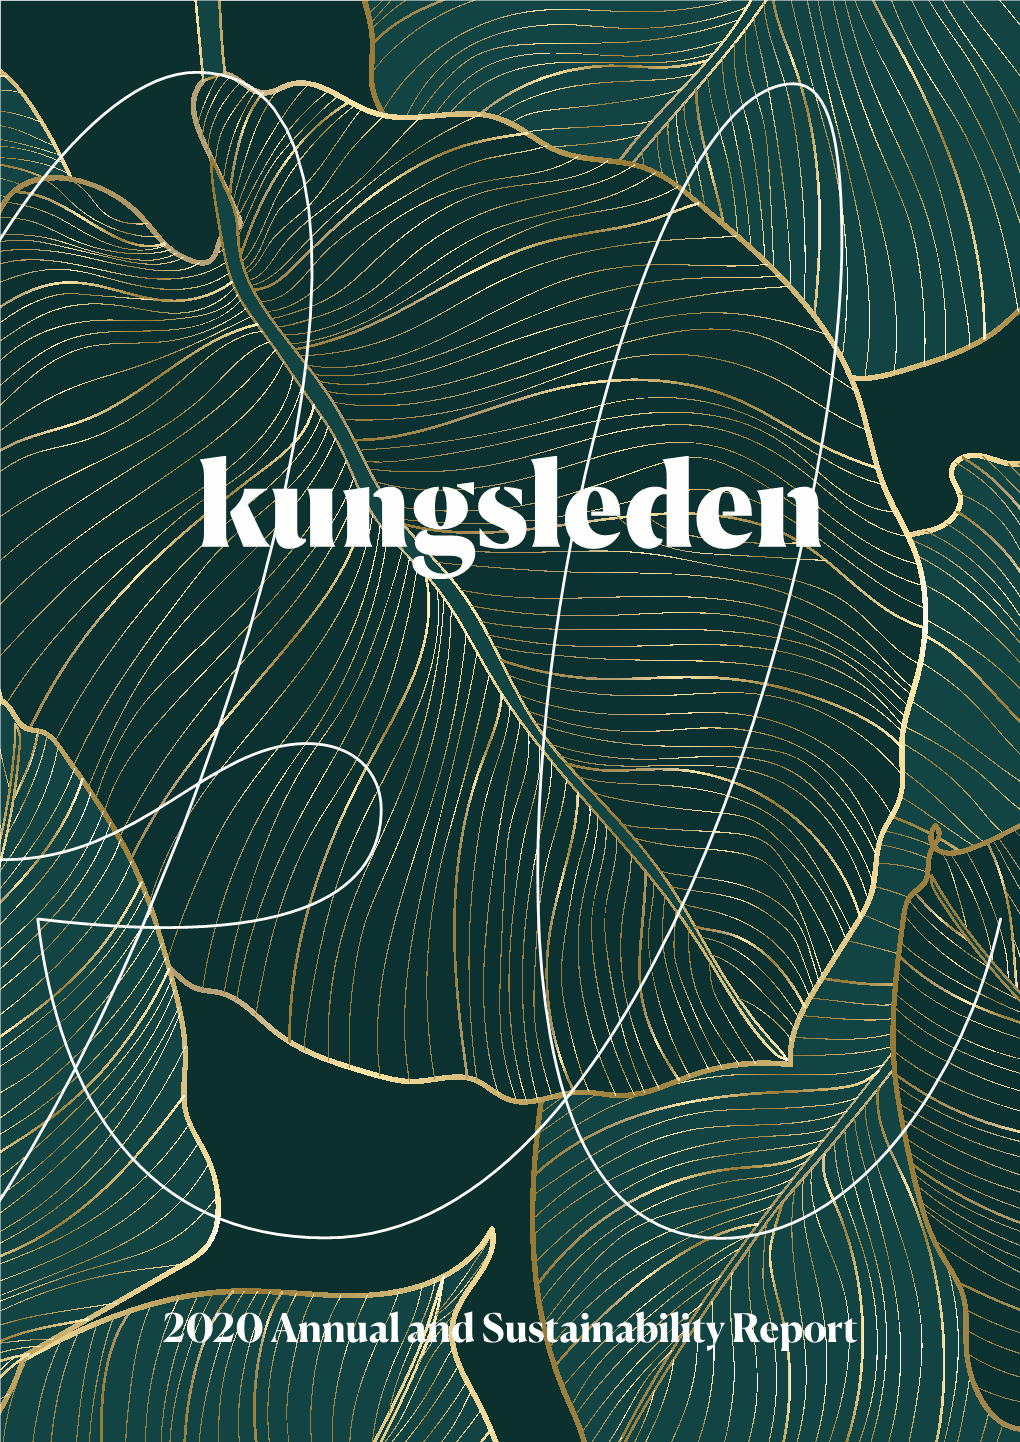 Kungsleden – 2020 Annual and Sustainability Report